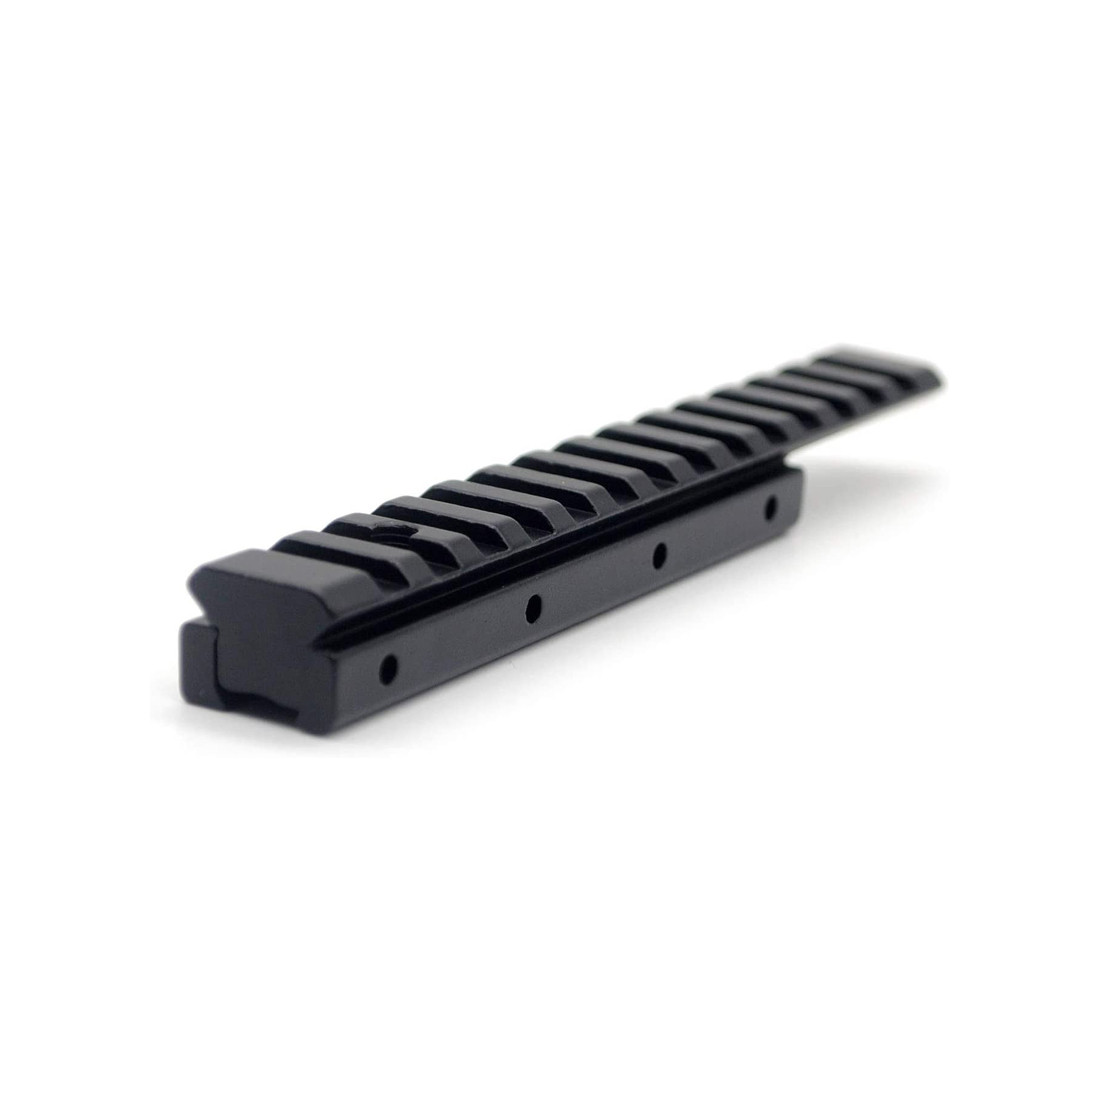 TRIROCK 155mm length Extension Dovetail Rail 11mm to 20mm Weaver ...